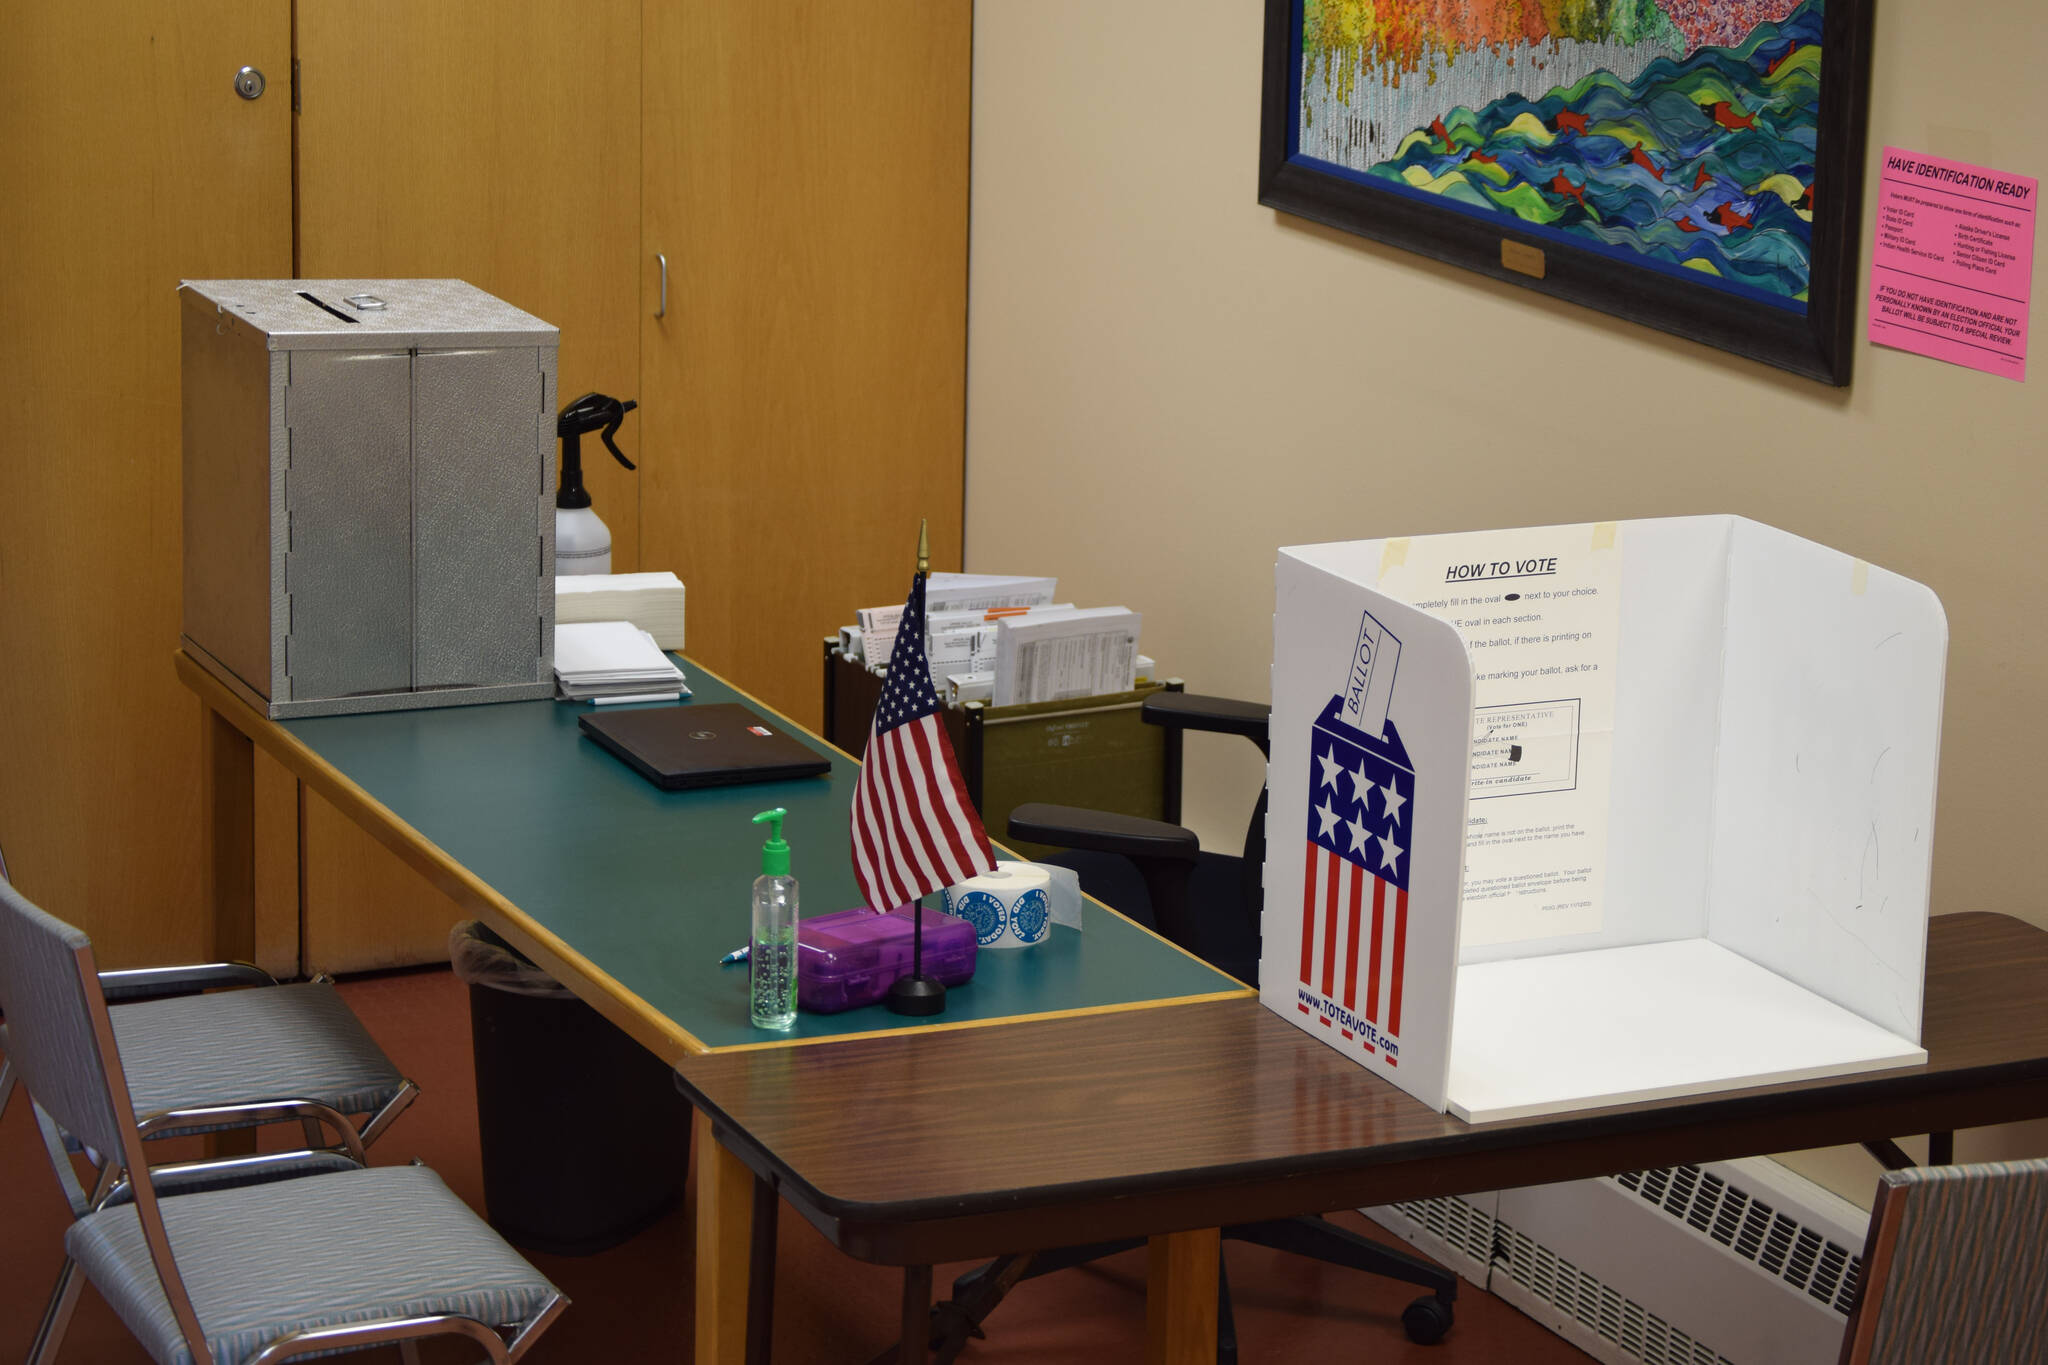 A tabletop voting booth is seen next to a ballot box at the Kenai city clerk’s office on Monday, Sept. 20, 2021, in Kenai, Alaska. (Peninsula Clarion file)